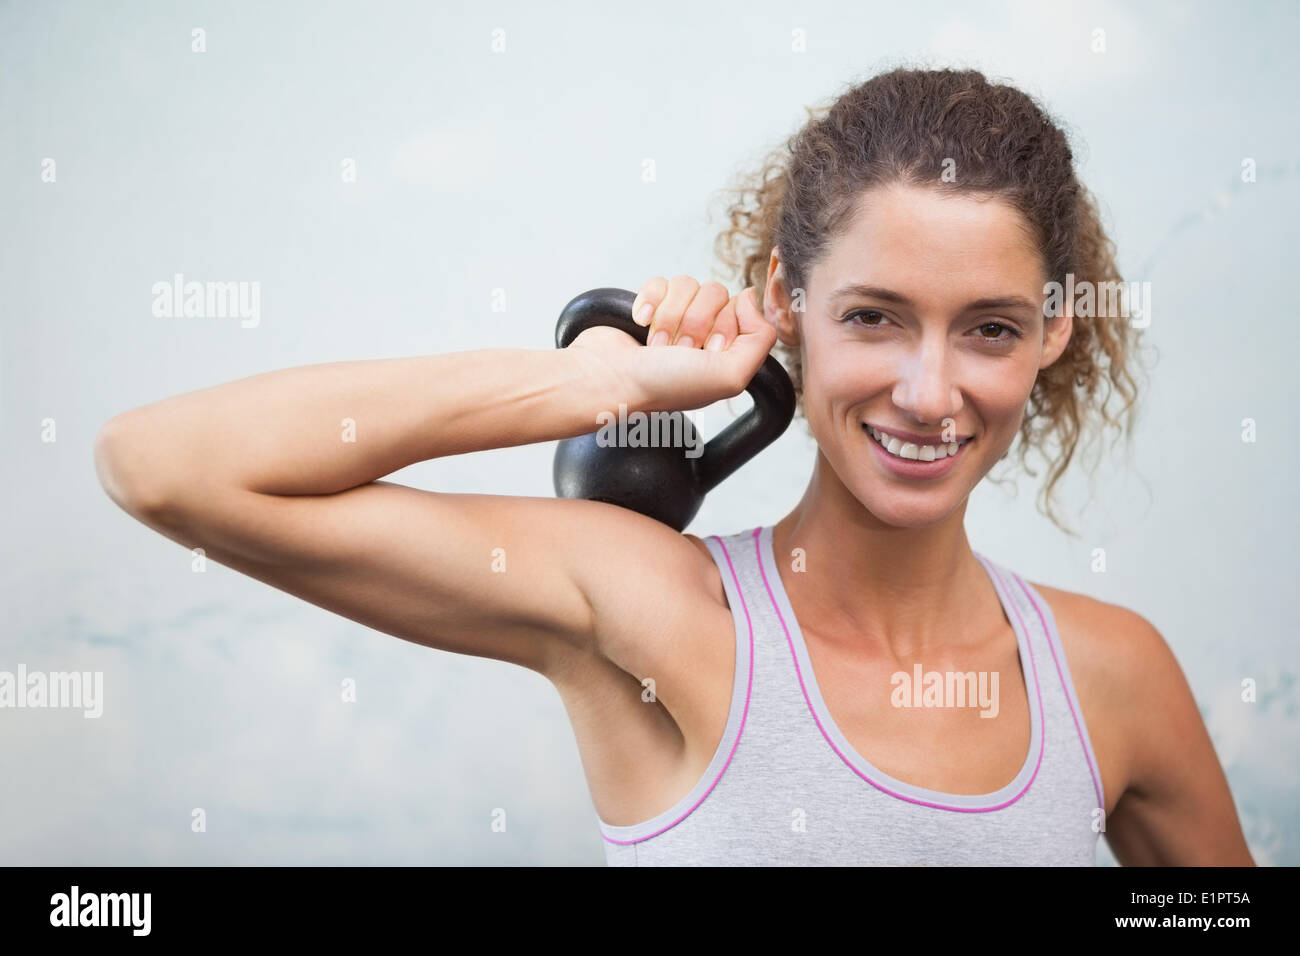 Fit woman smiling at camera holding kettlebell Banque D'Images